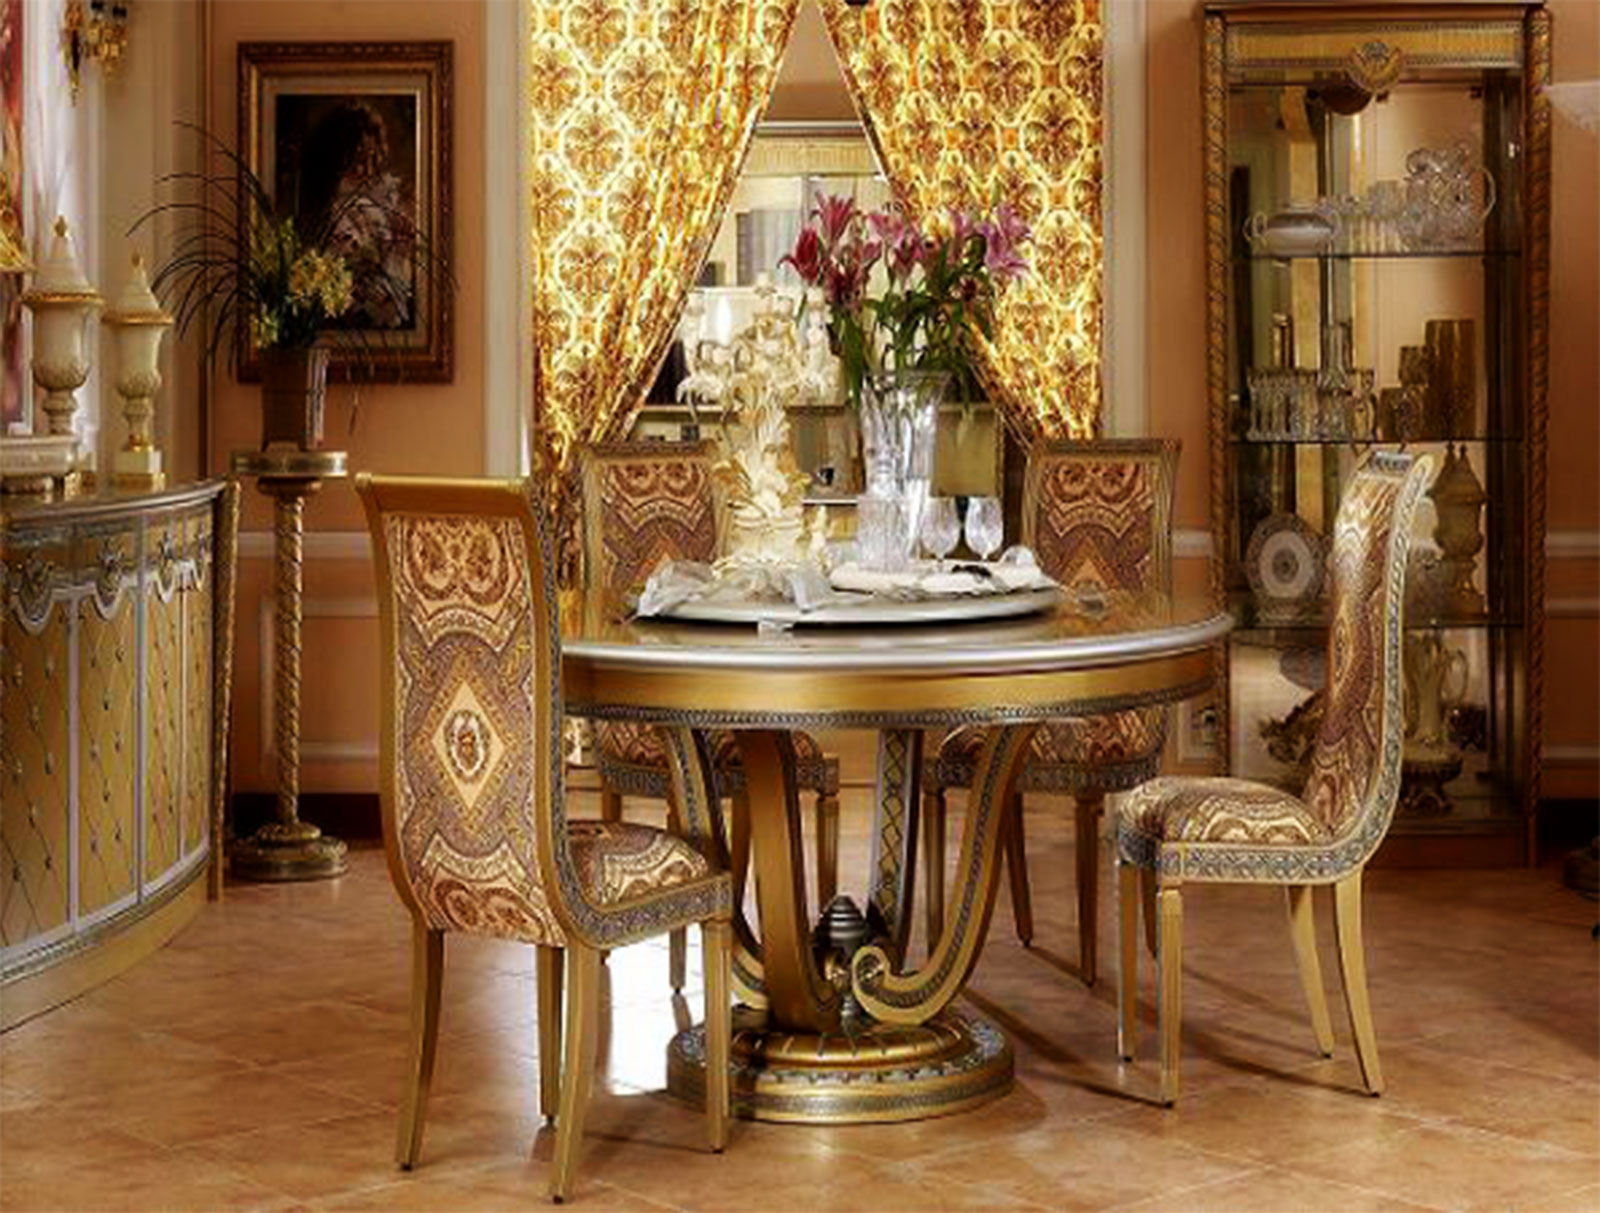 With Gold Finish Dining Table Chairs : Furniture Ideas | DeltaAngelGroup